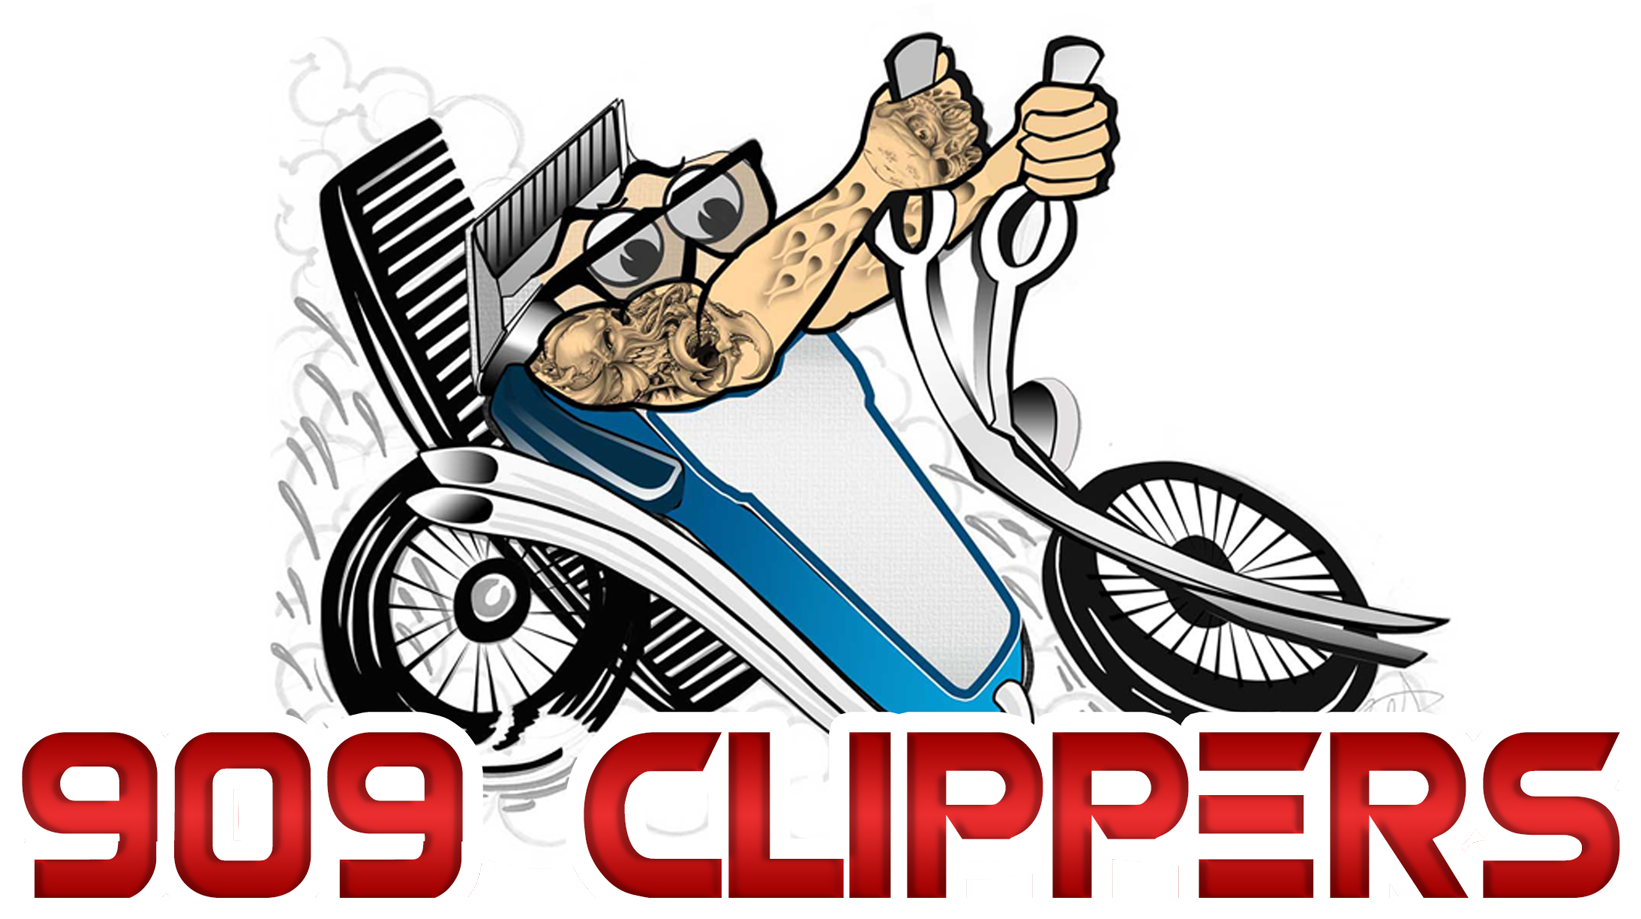 Welcome To 909 Clippers Barber Shop - Best Logo For Barber Shop (1668x962)